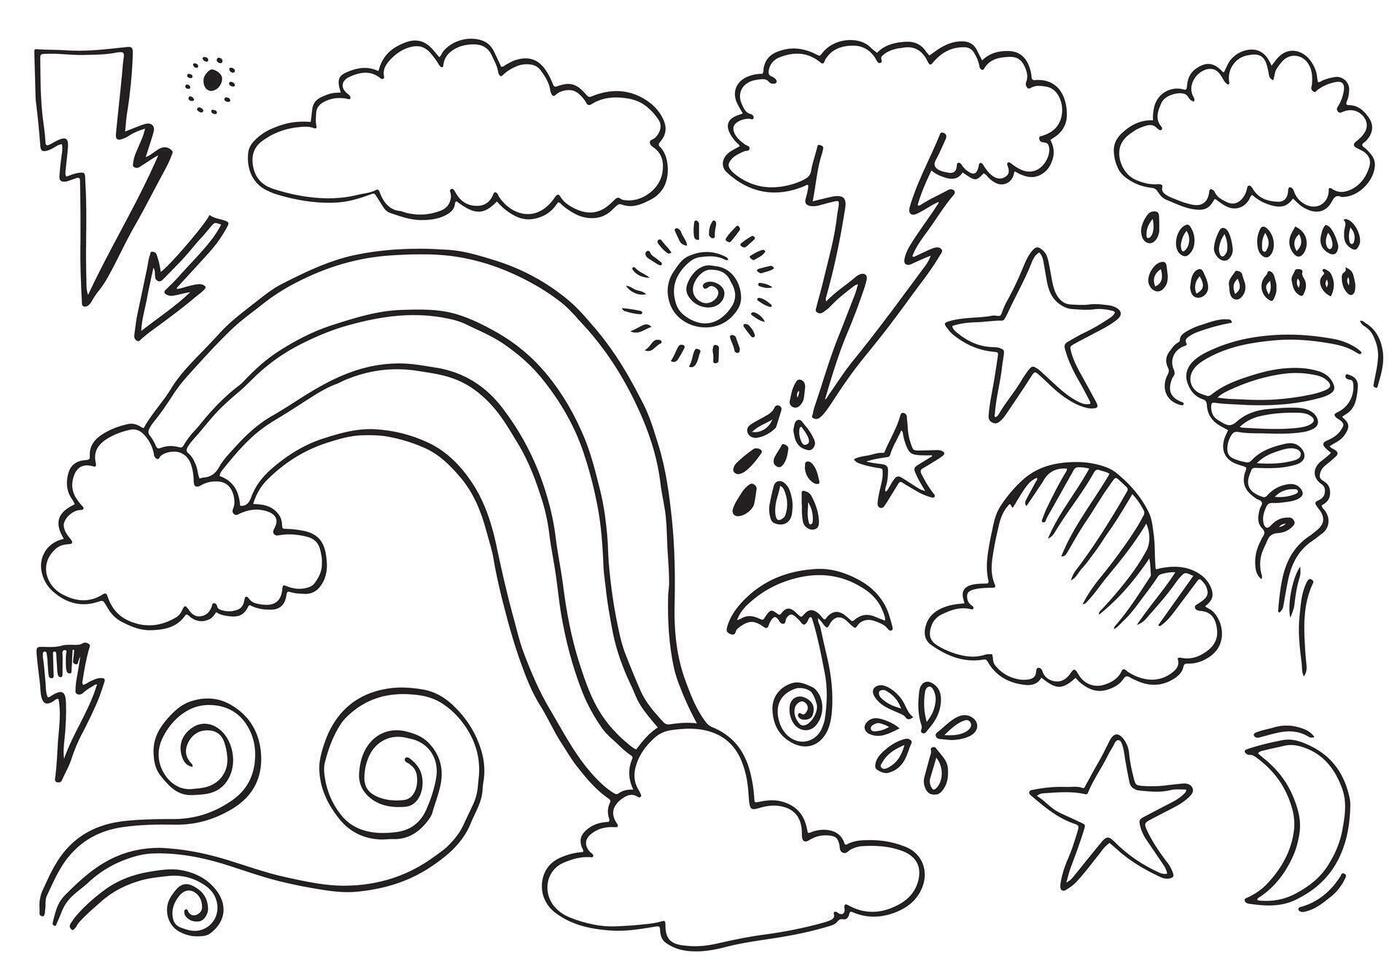 Hand drawn weather collection. Flat style vector illustration on white background.